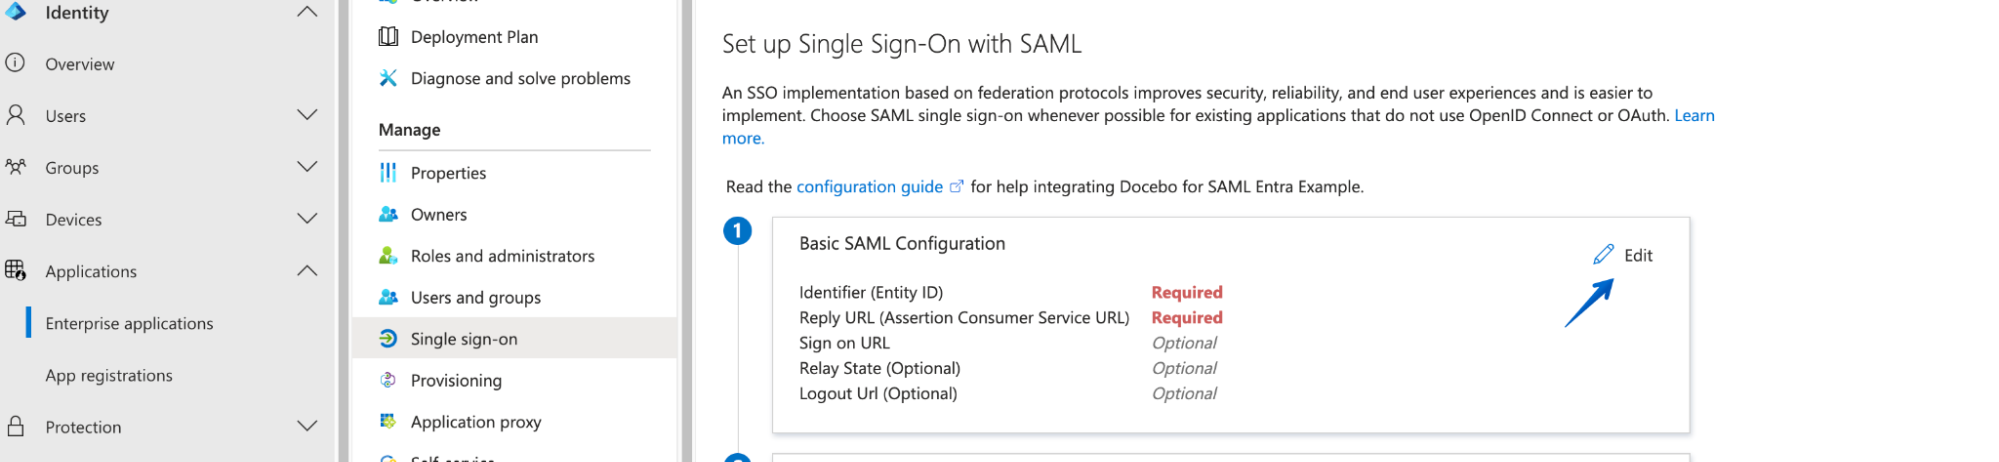 Pressing Edit in the Basic SAML Configuration section